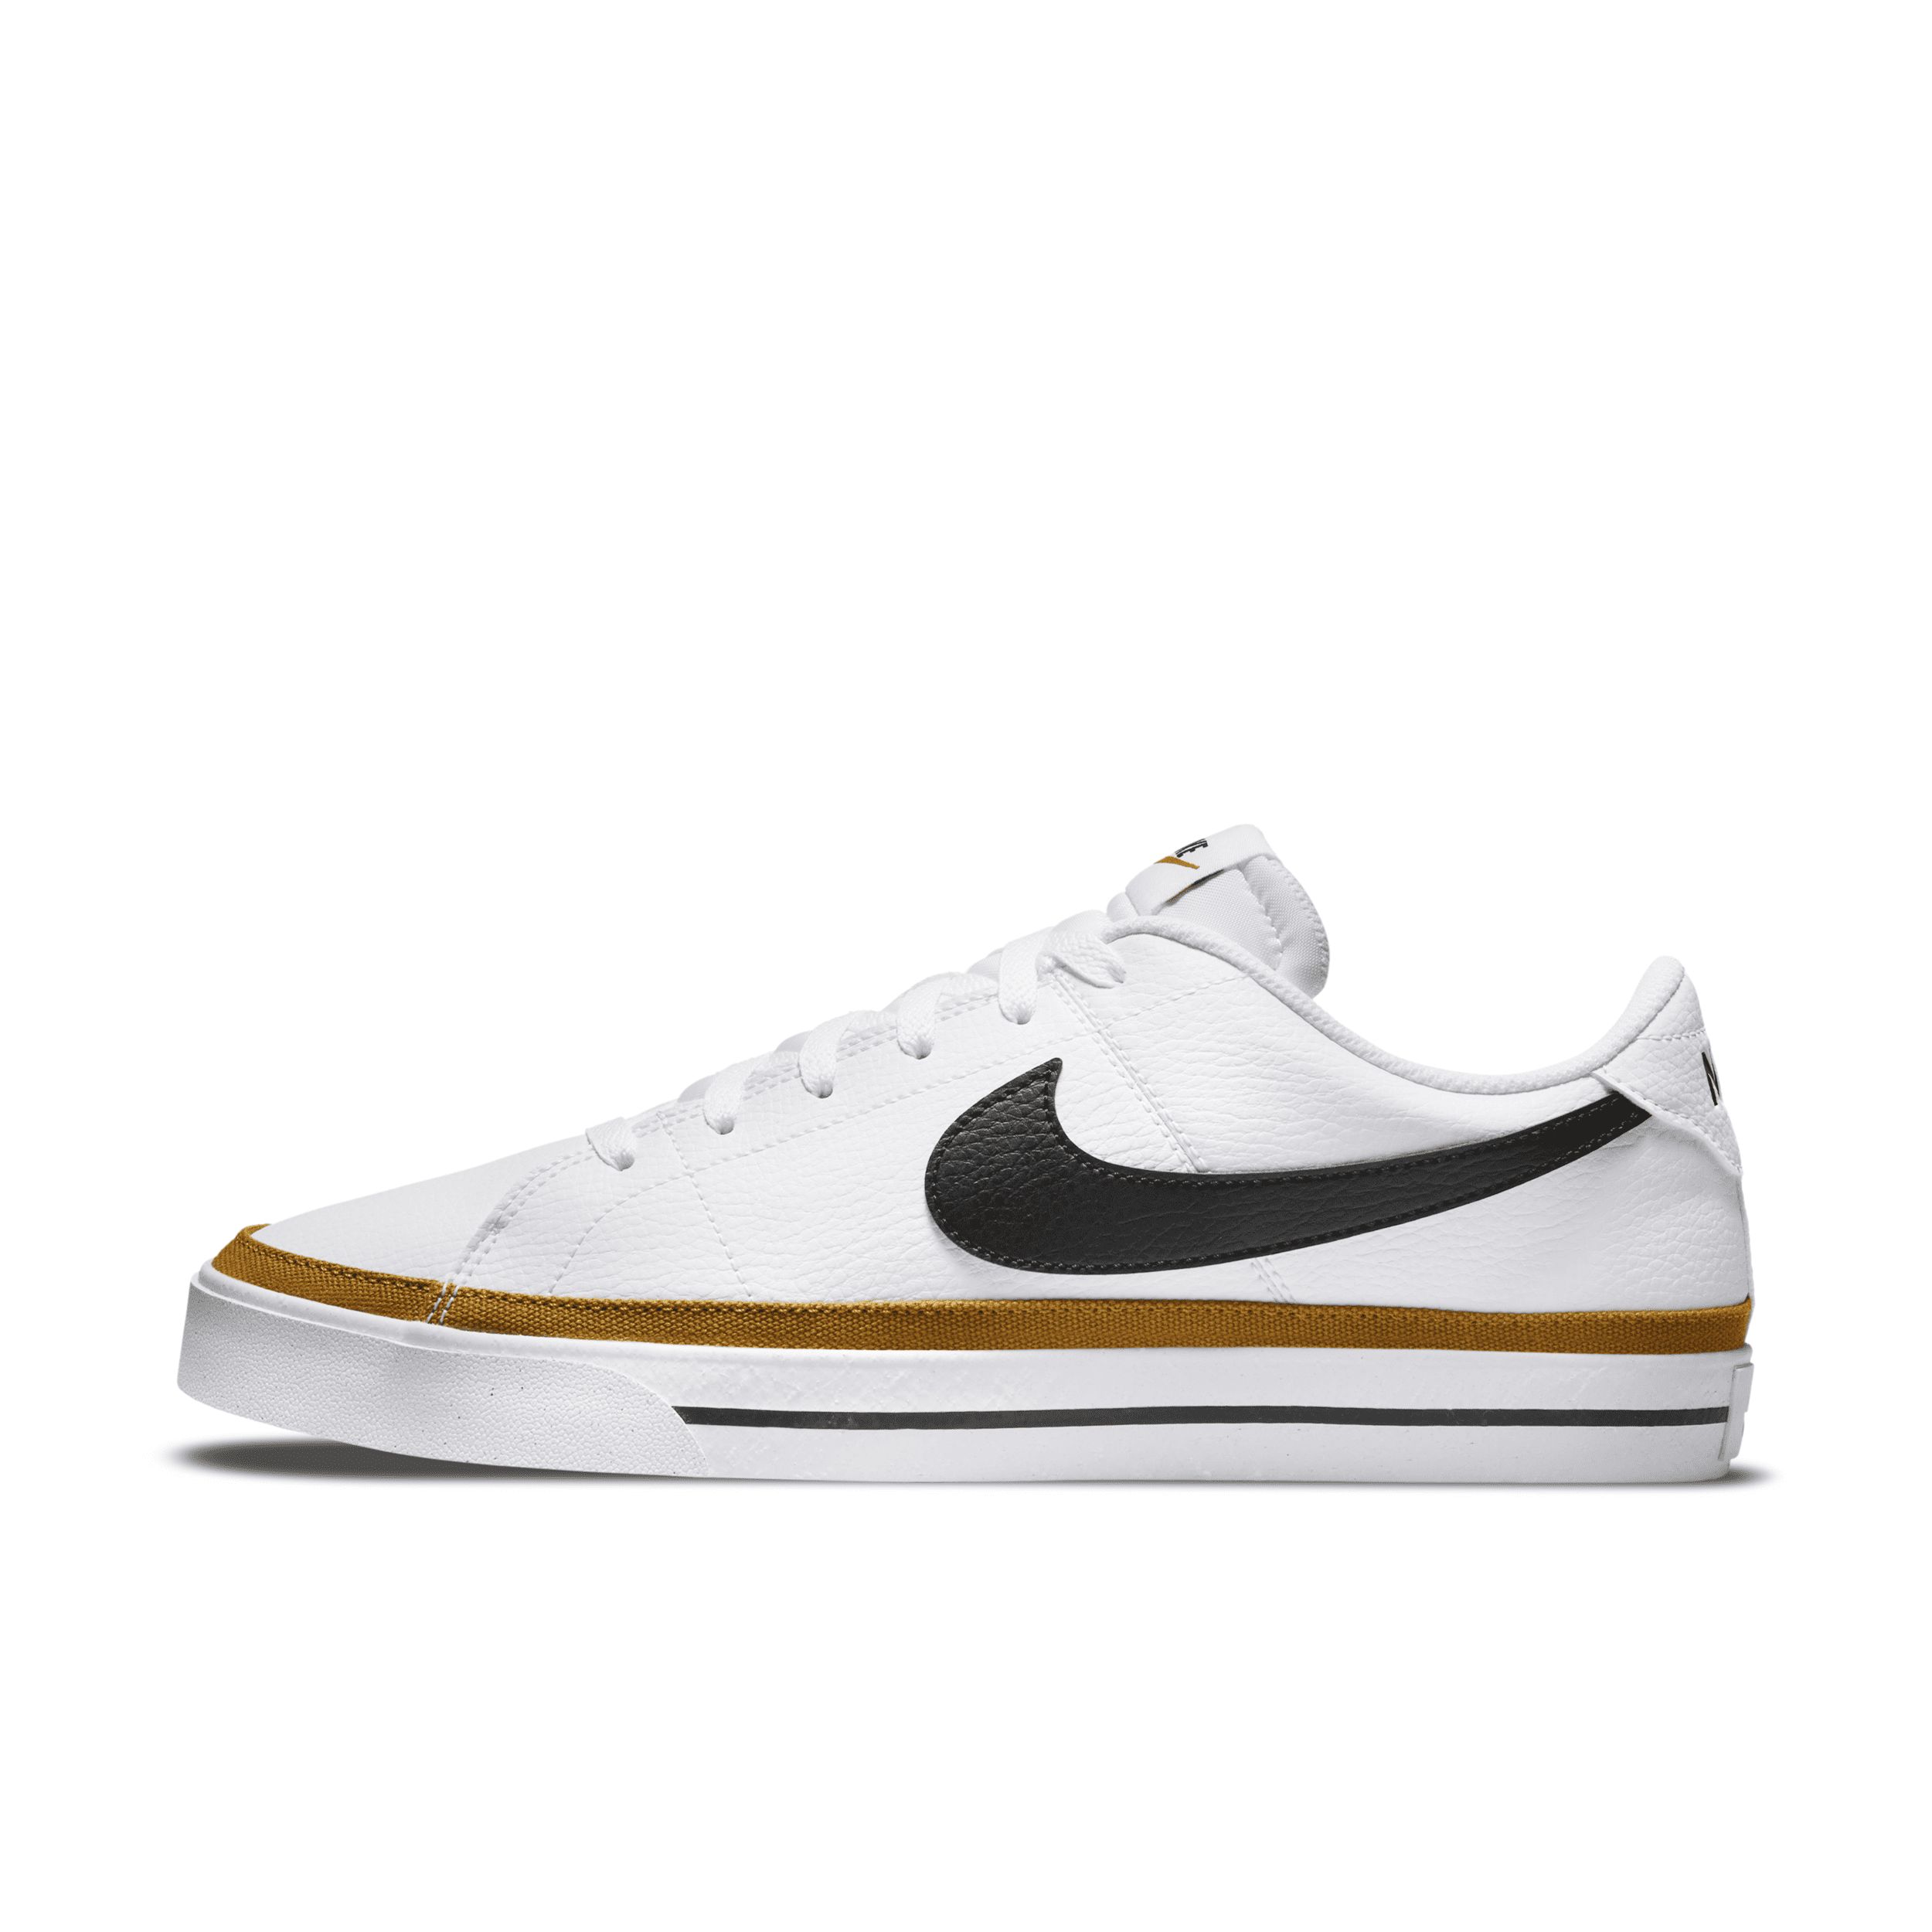 Nike Men's Court Legacy Shoes in White, Size: 8.5 | DH3162-100 | Nike (US)